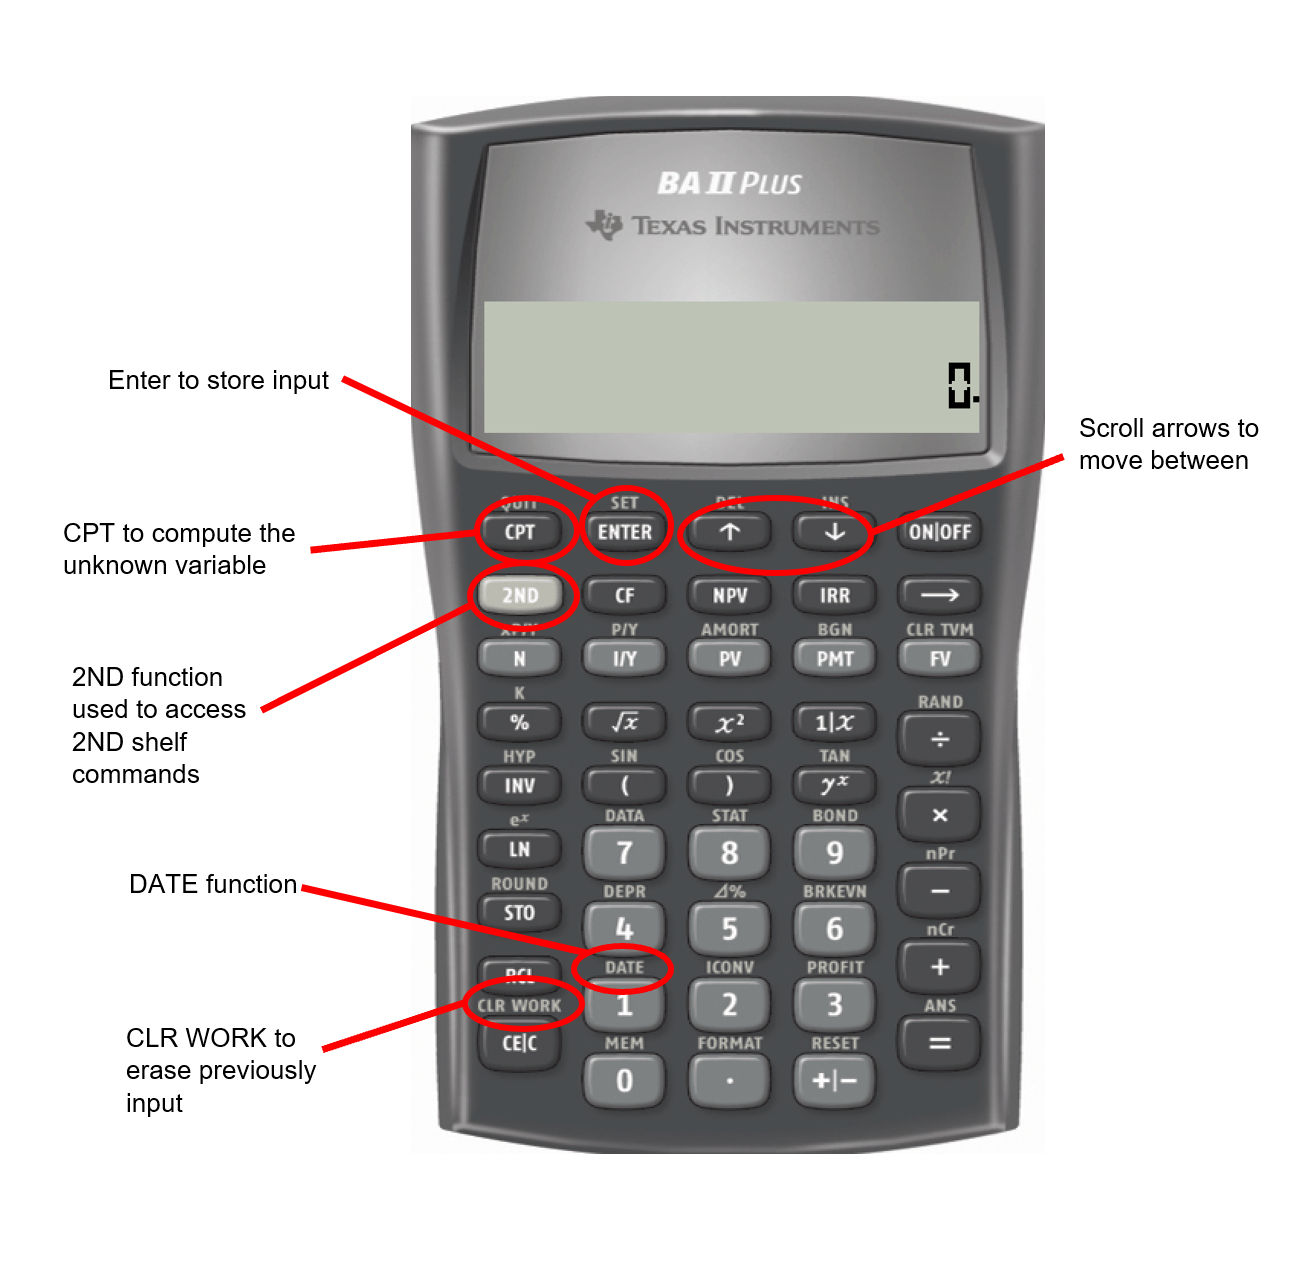 Picture of the BAII Plus calculator showing the ENTER, CPT, 2ND, DATE, CLR WORK, UP ARROW, DOWN ARROW keys.